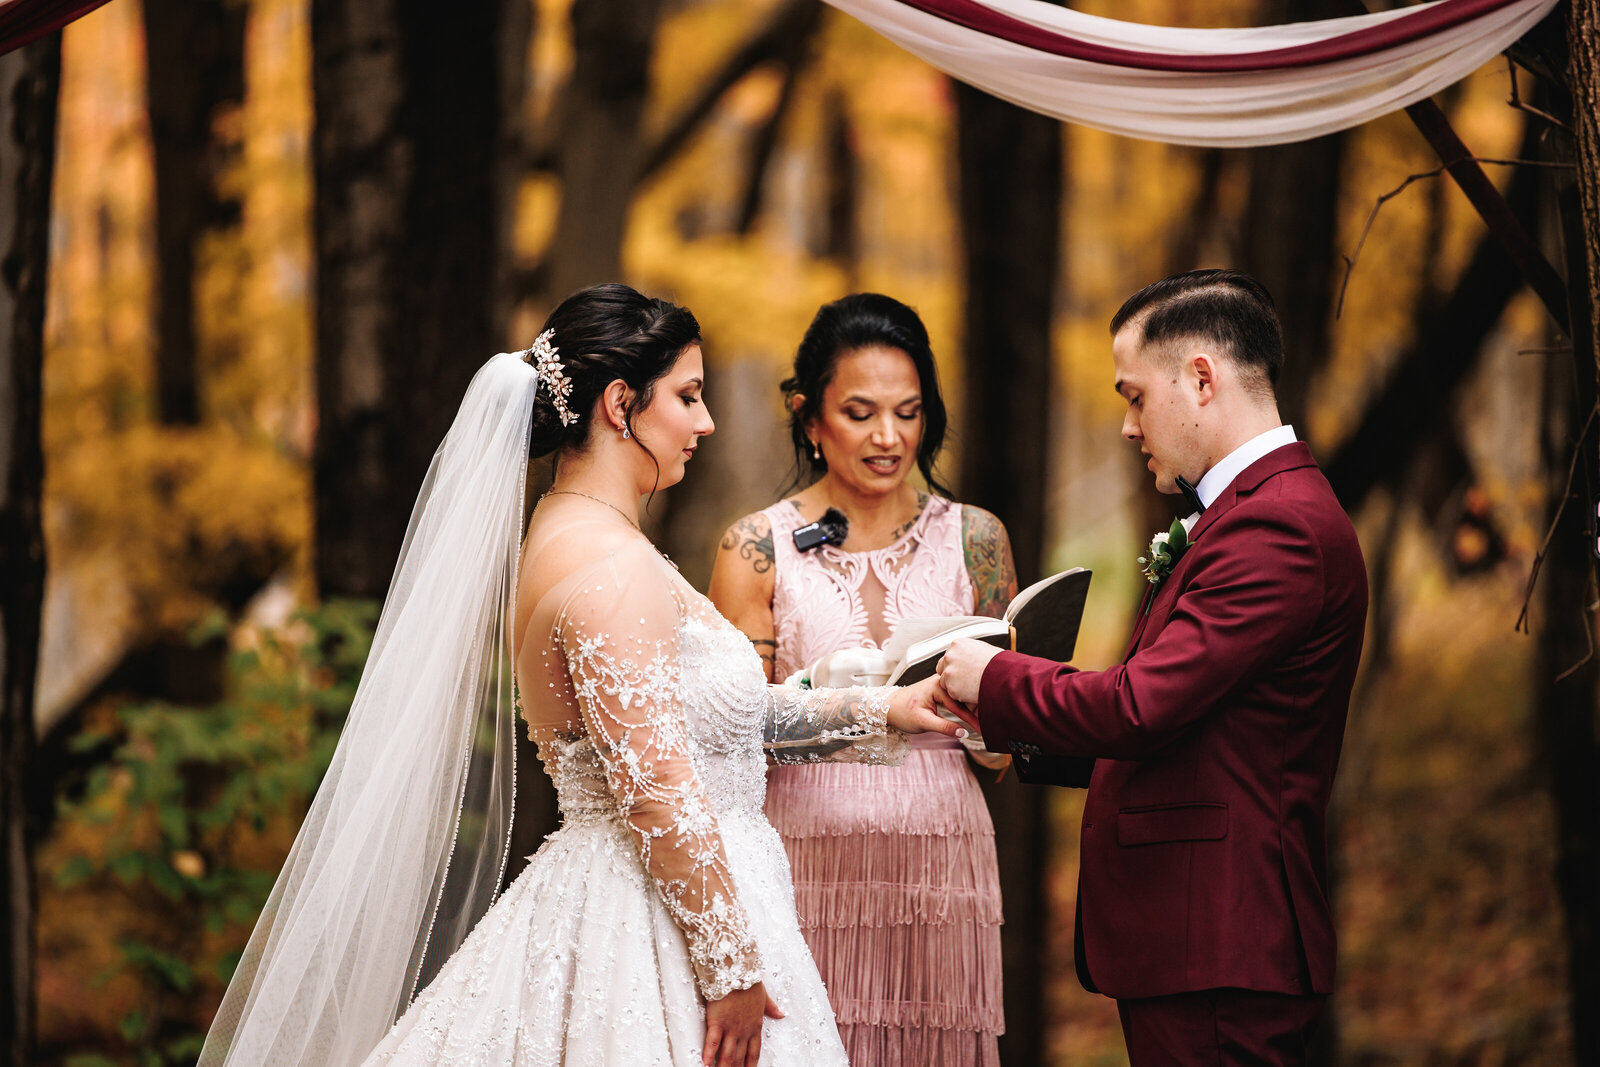 Groom places ring on his brides finger during their wedding ceremony